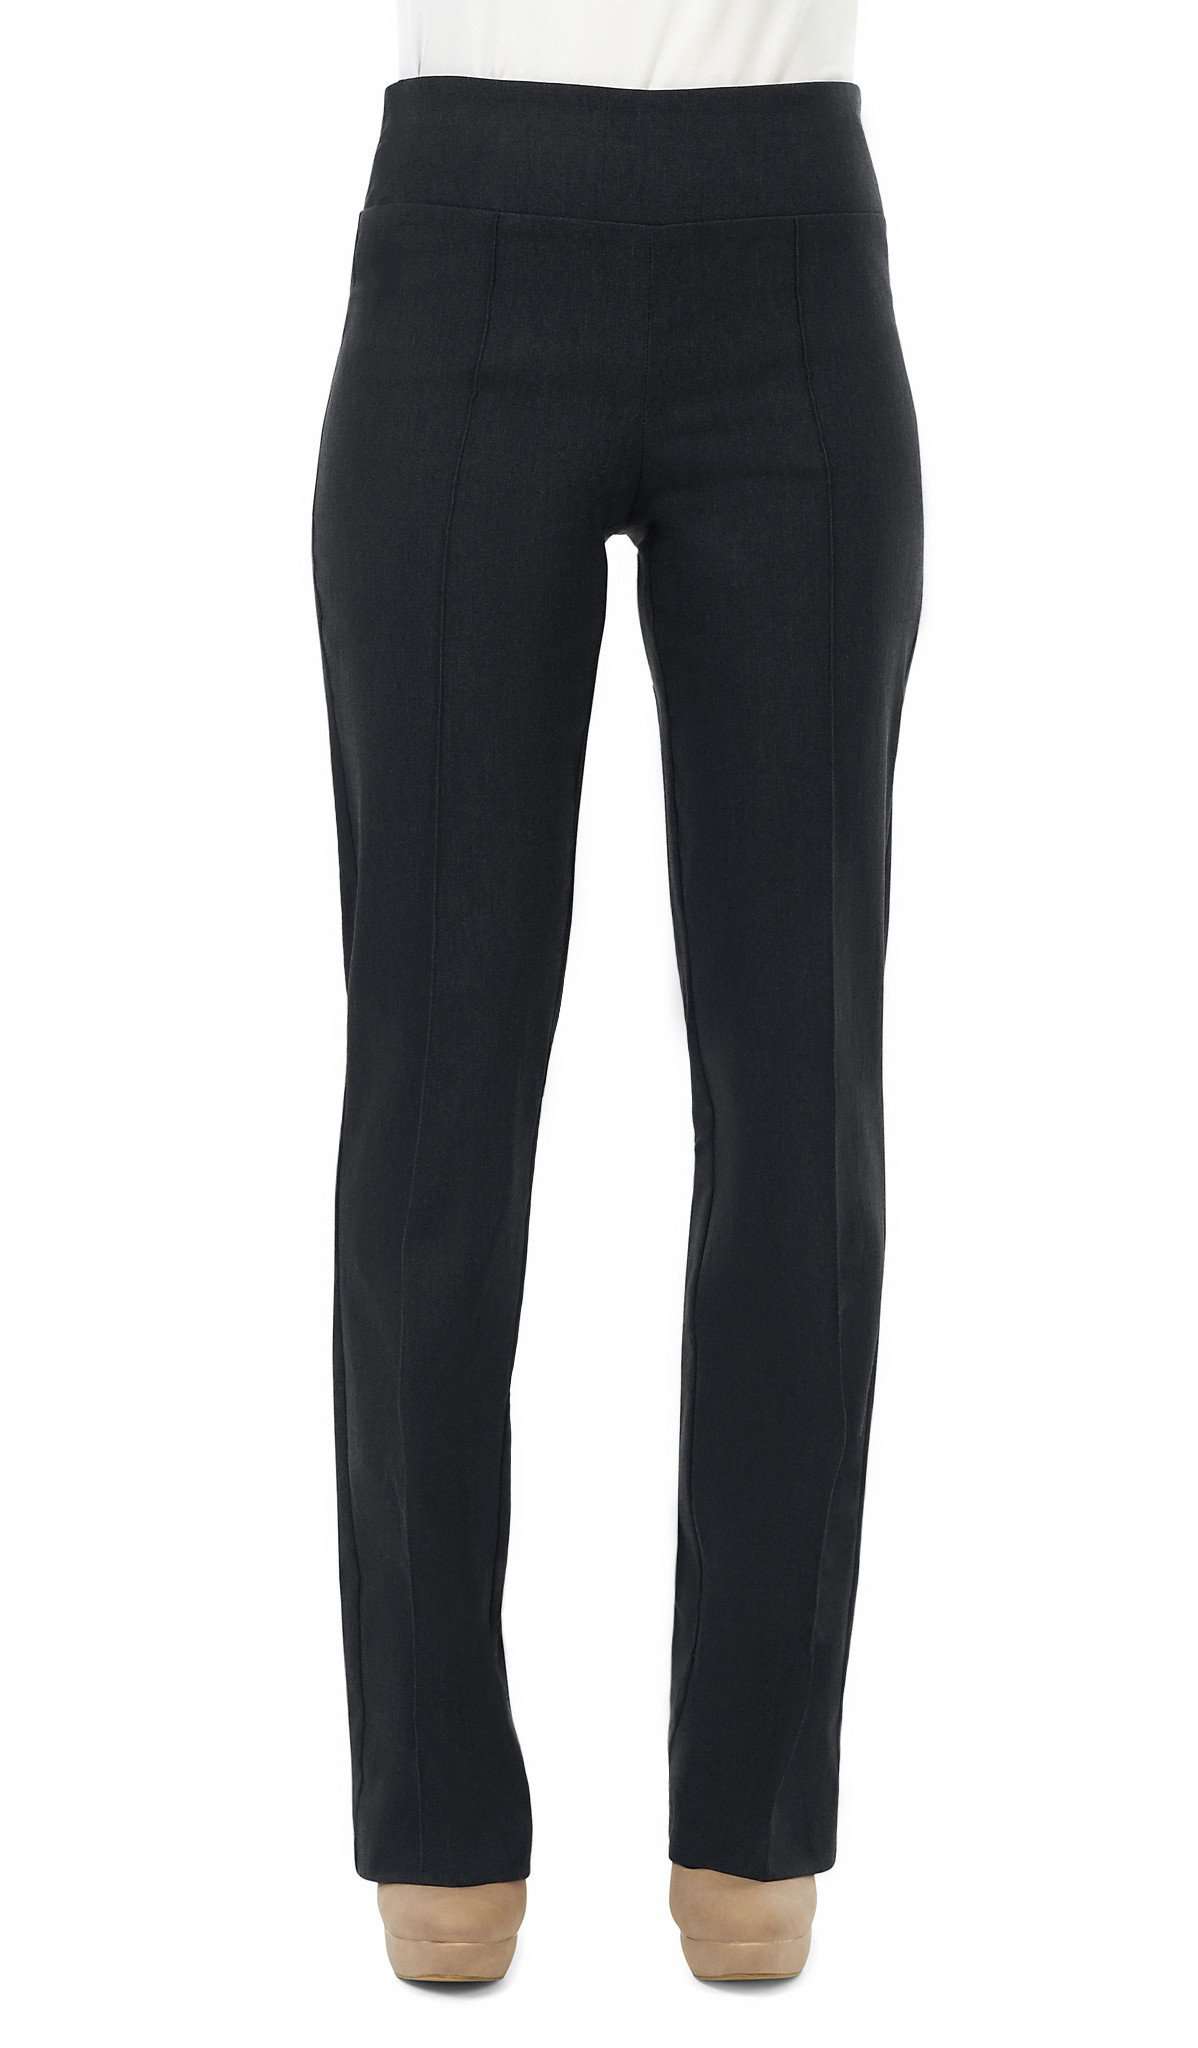 Women's Charcoal Pant Quality Grey Stretch Fabric Flattering Fit Quality Made in Canada Yvonne Marie Boutiques - Yvonne Marie - Yvonne Marie